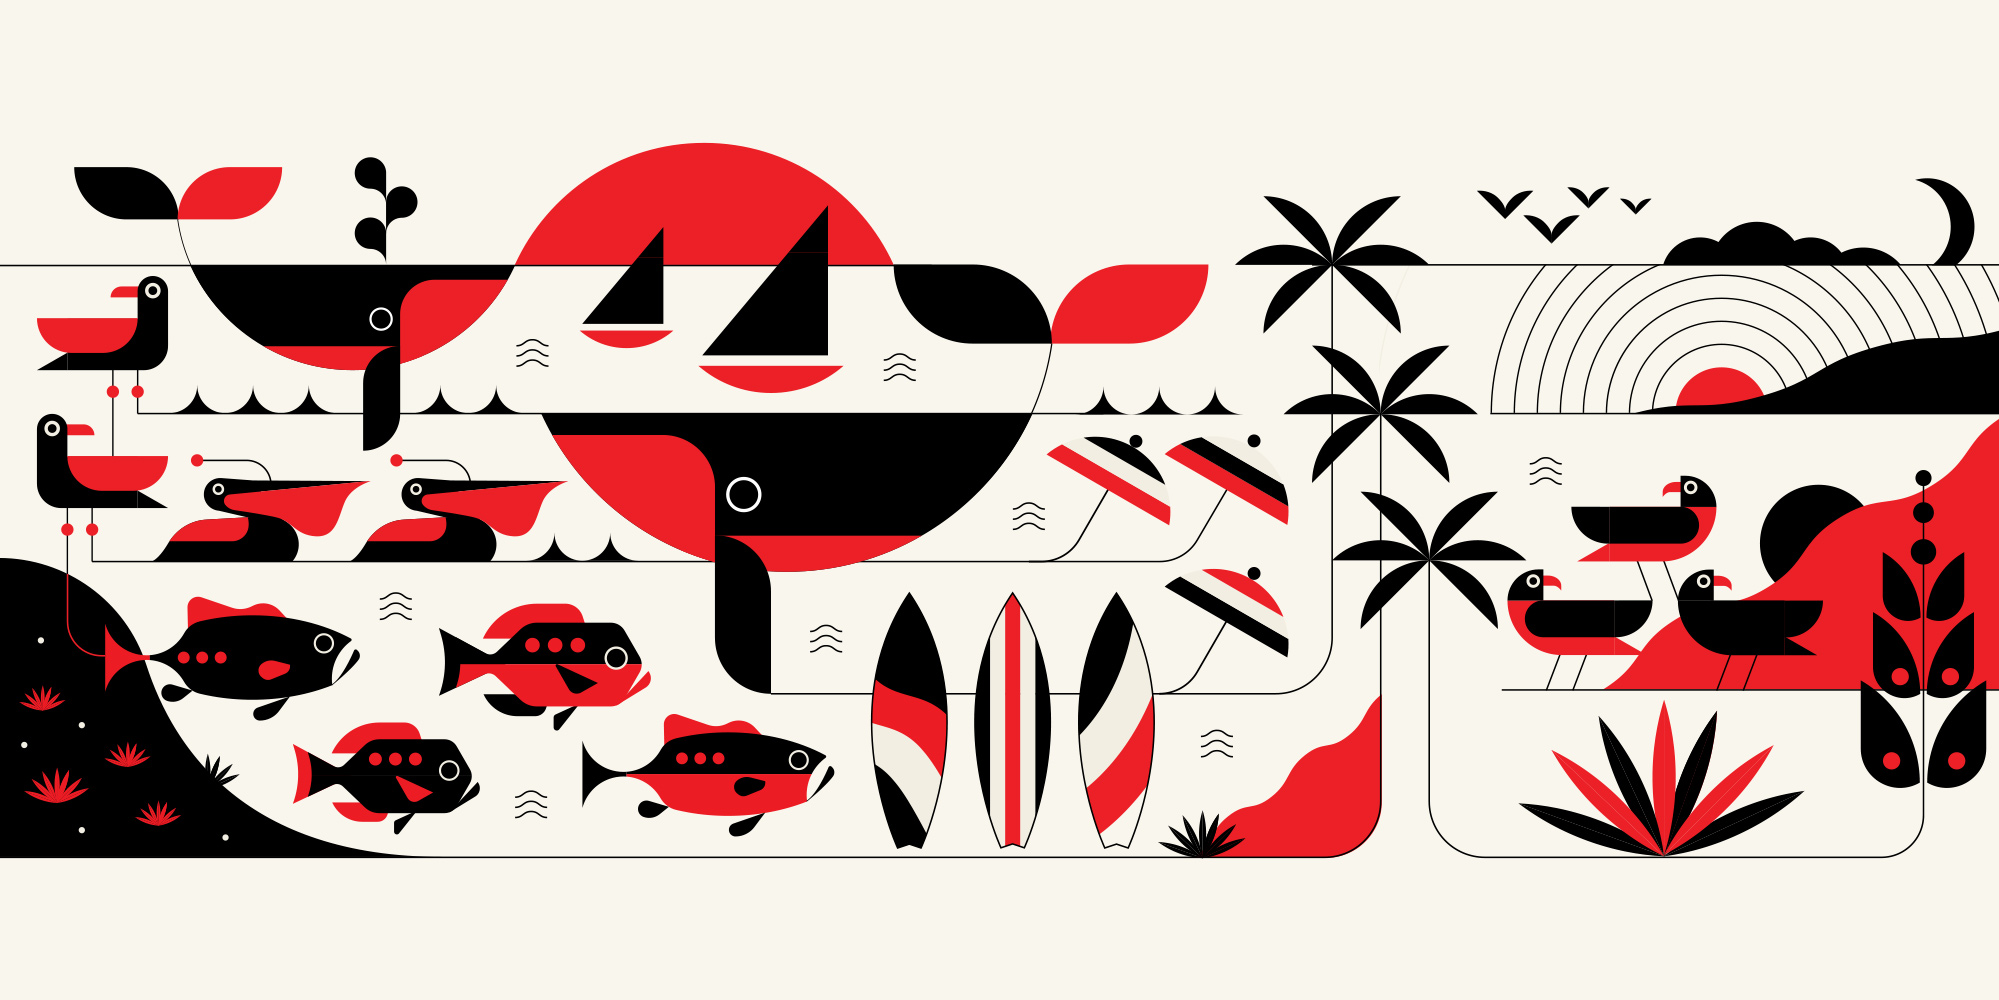 mural on white brick wall mock-up with whales, sailboats, fish, surfboards, beach umbrellas and palm trees in red and black